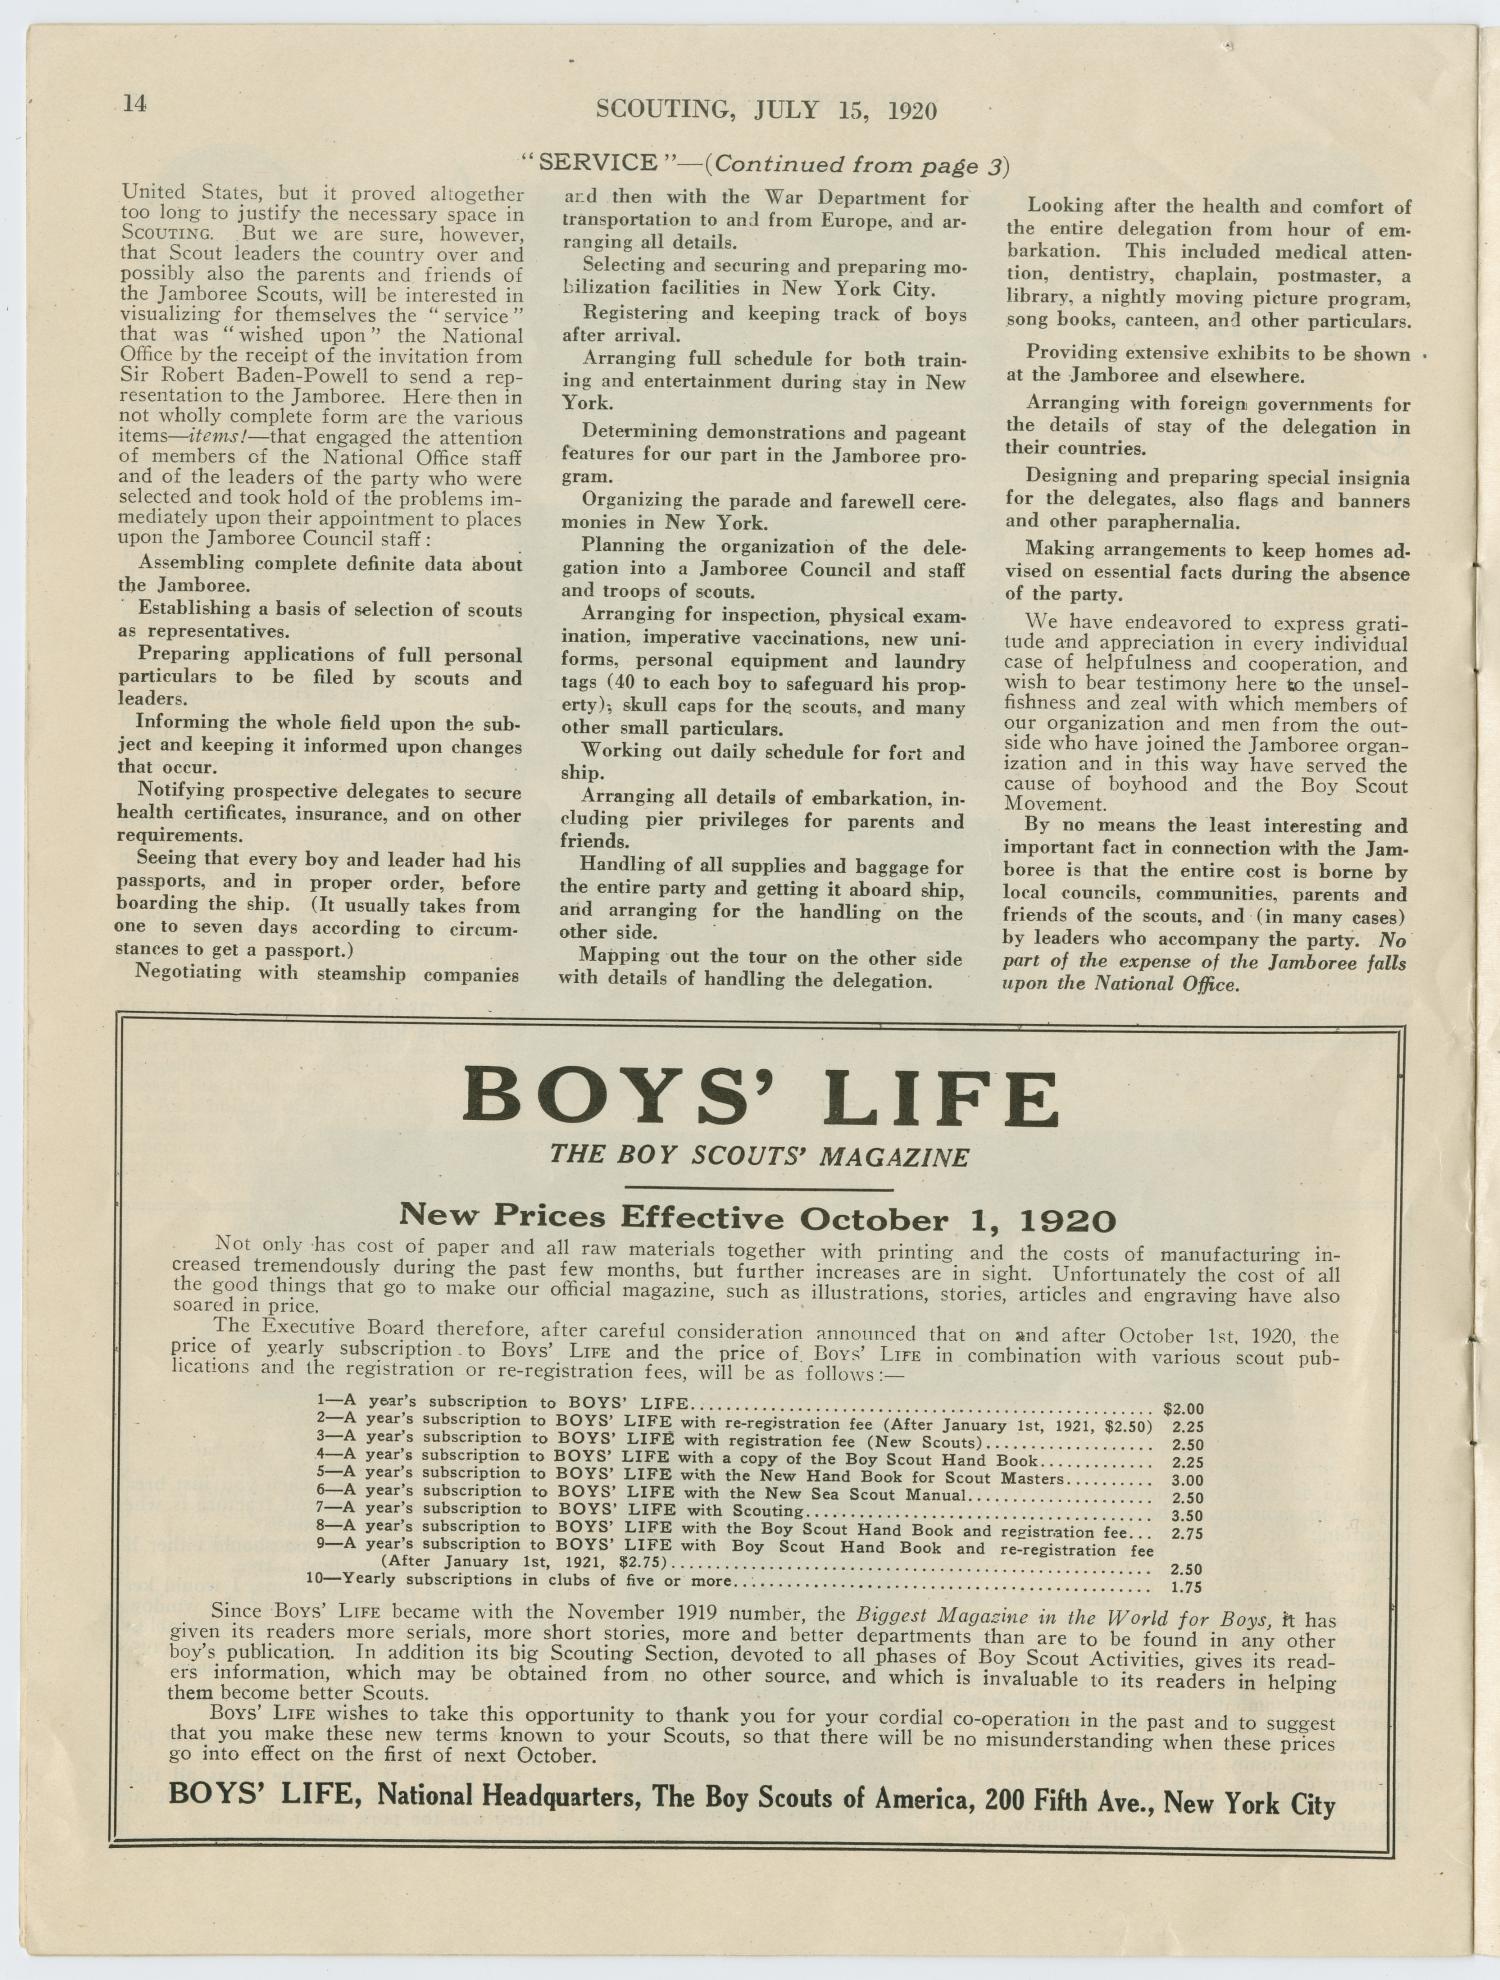 Scouting, Volume 8, Number 12, July 15, 1920
                                                
                                                    14
                                                